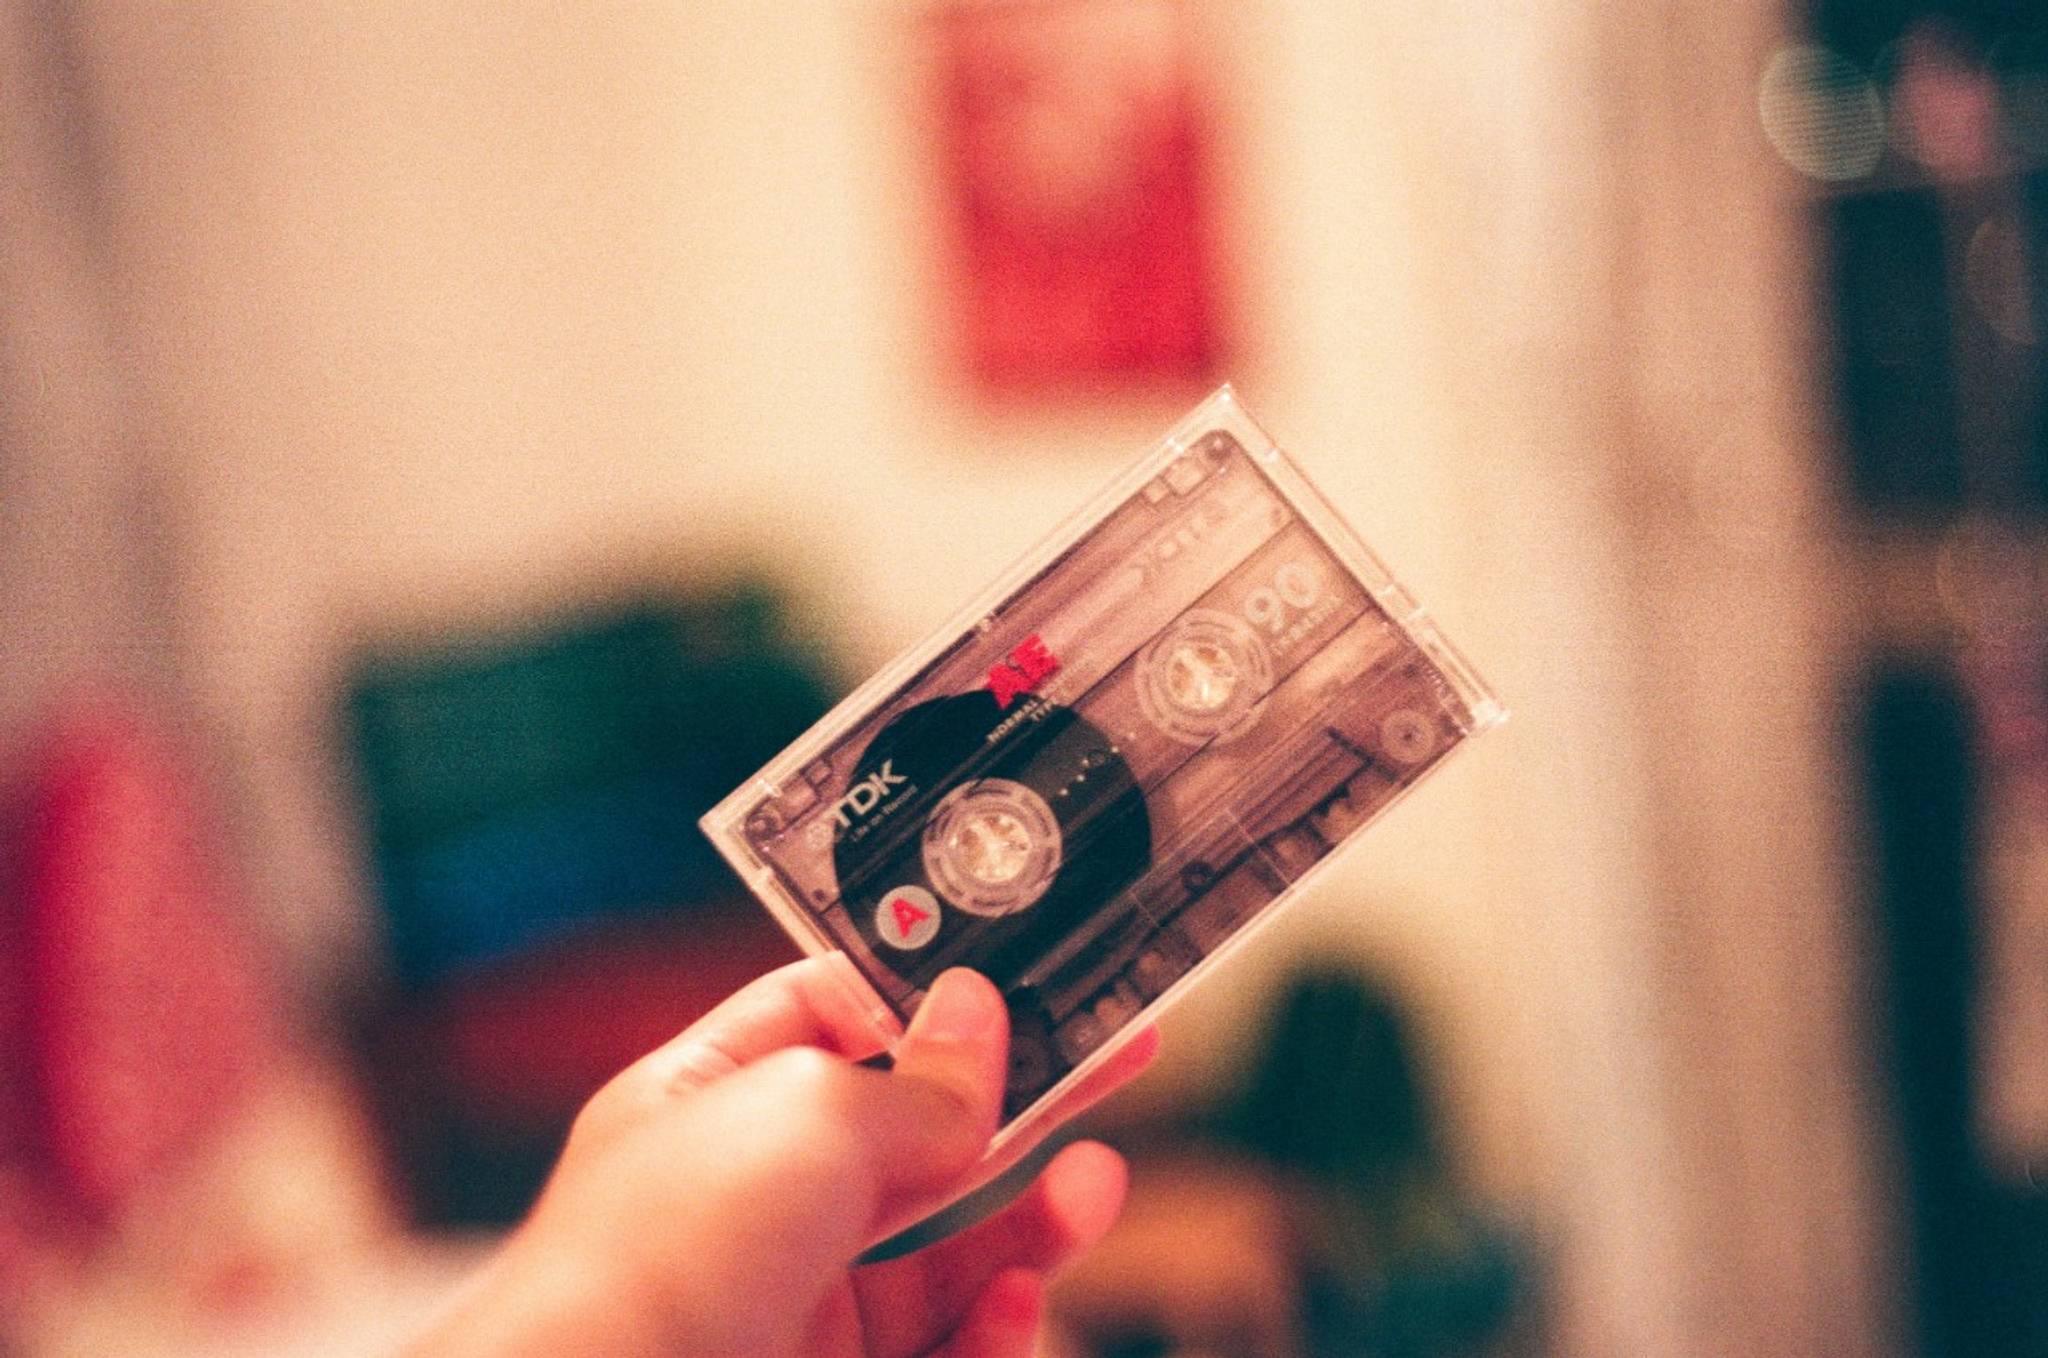 Cassettes offer an antidote to impersonal digital music